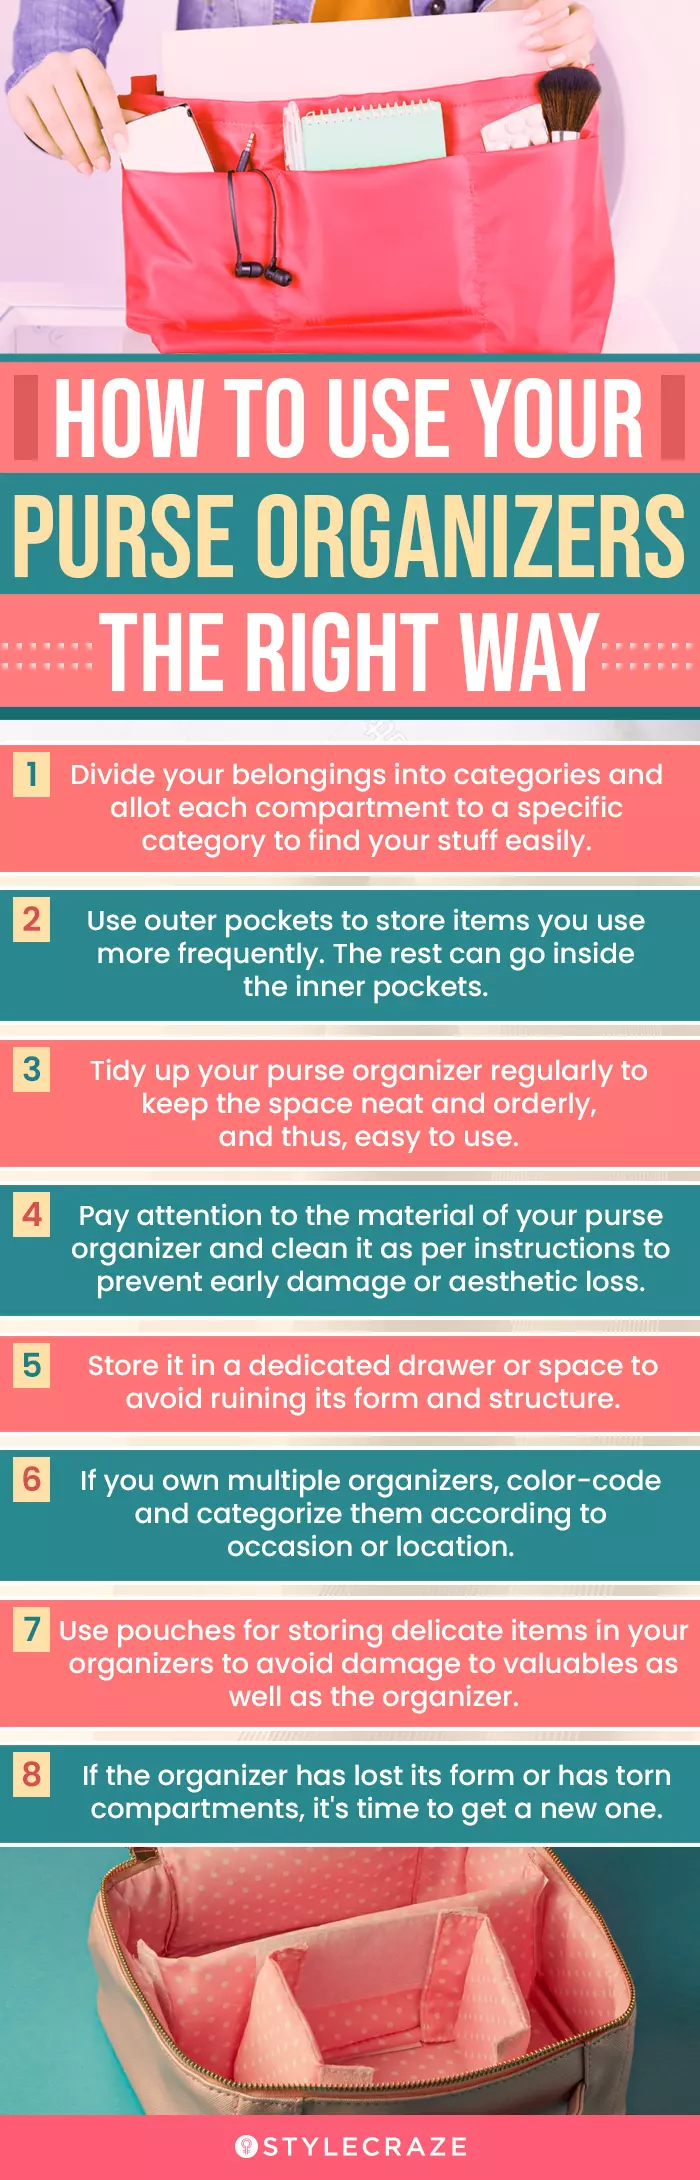 How To Use Your Purse Organizers The Right Way (infographic)